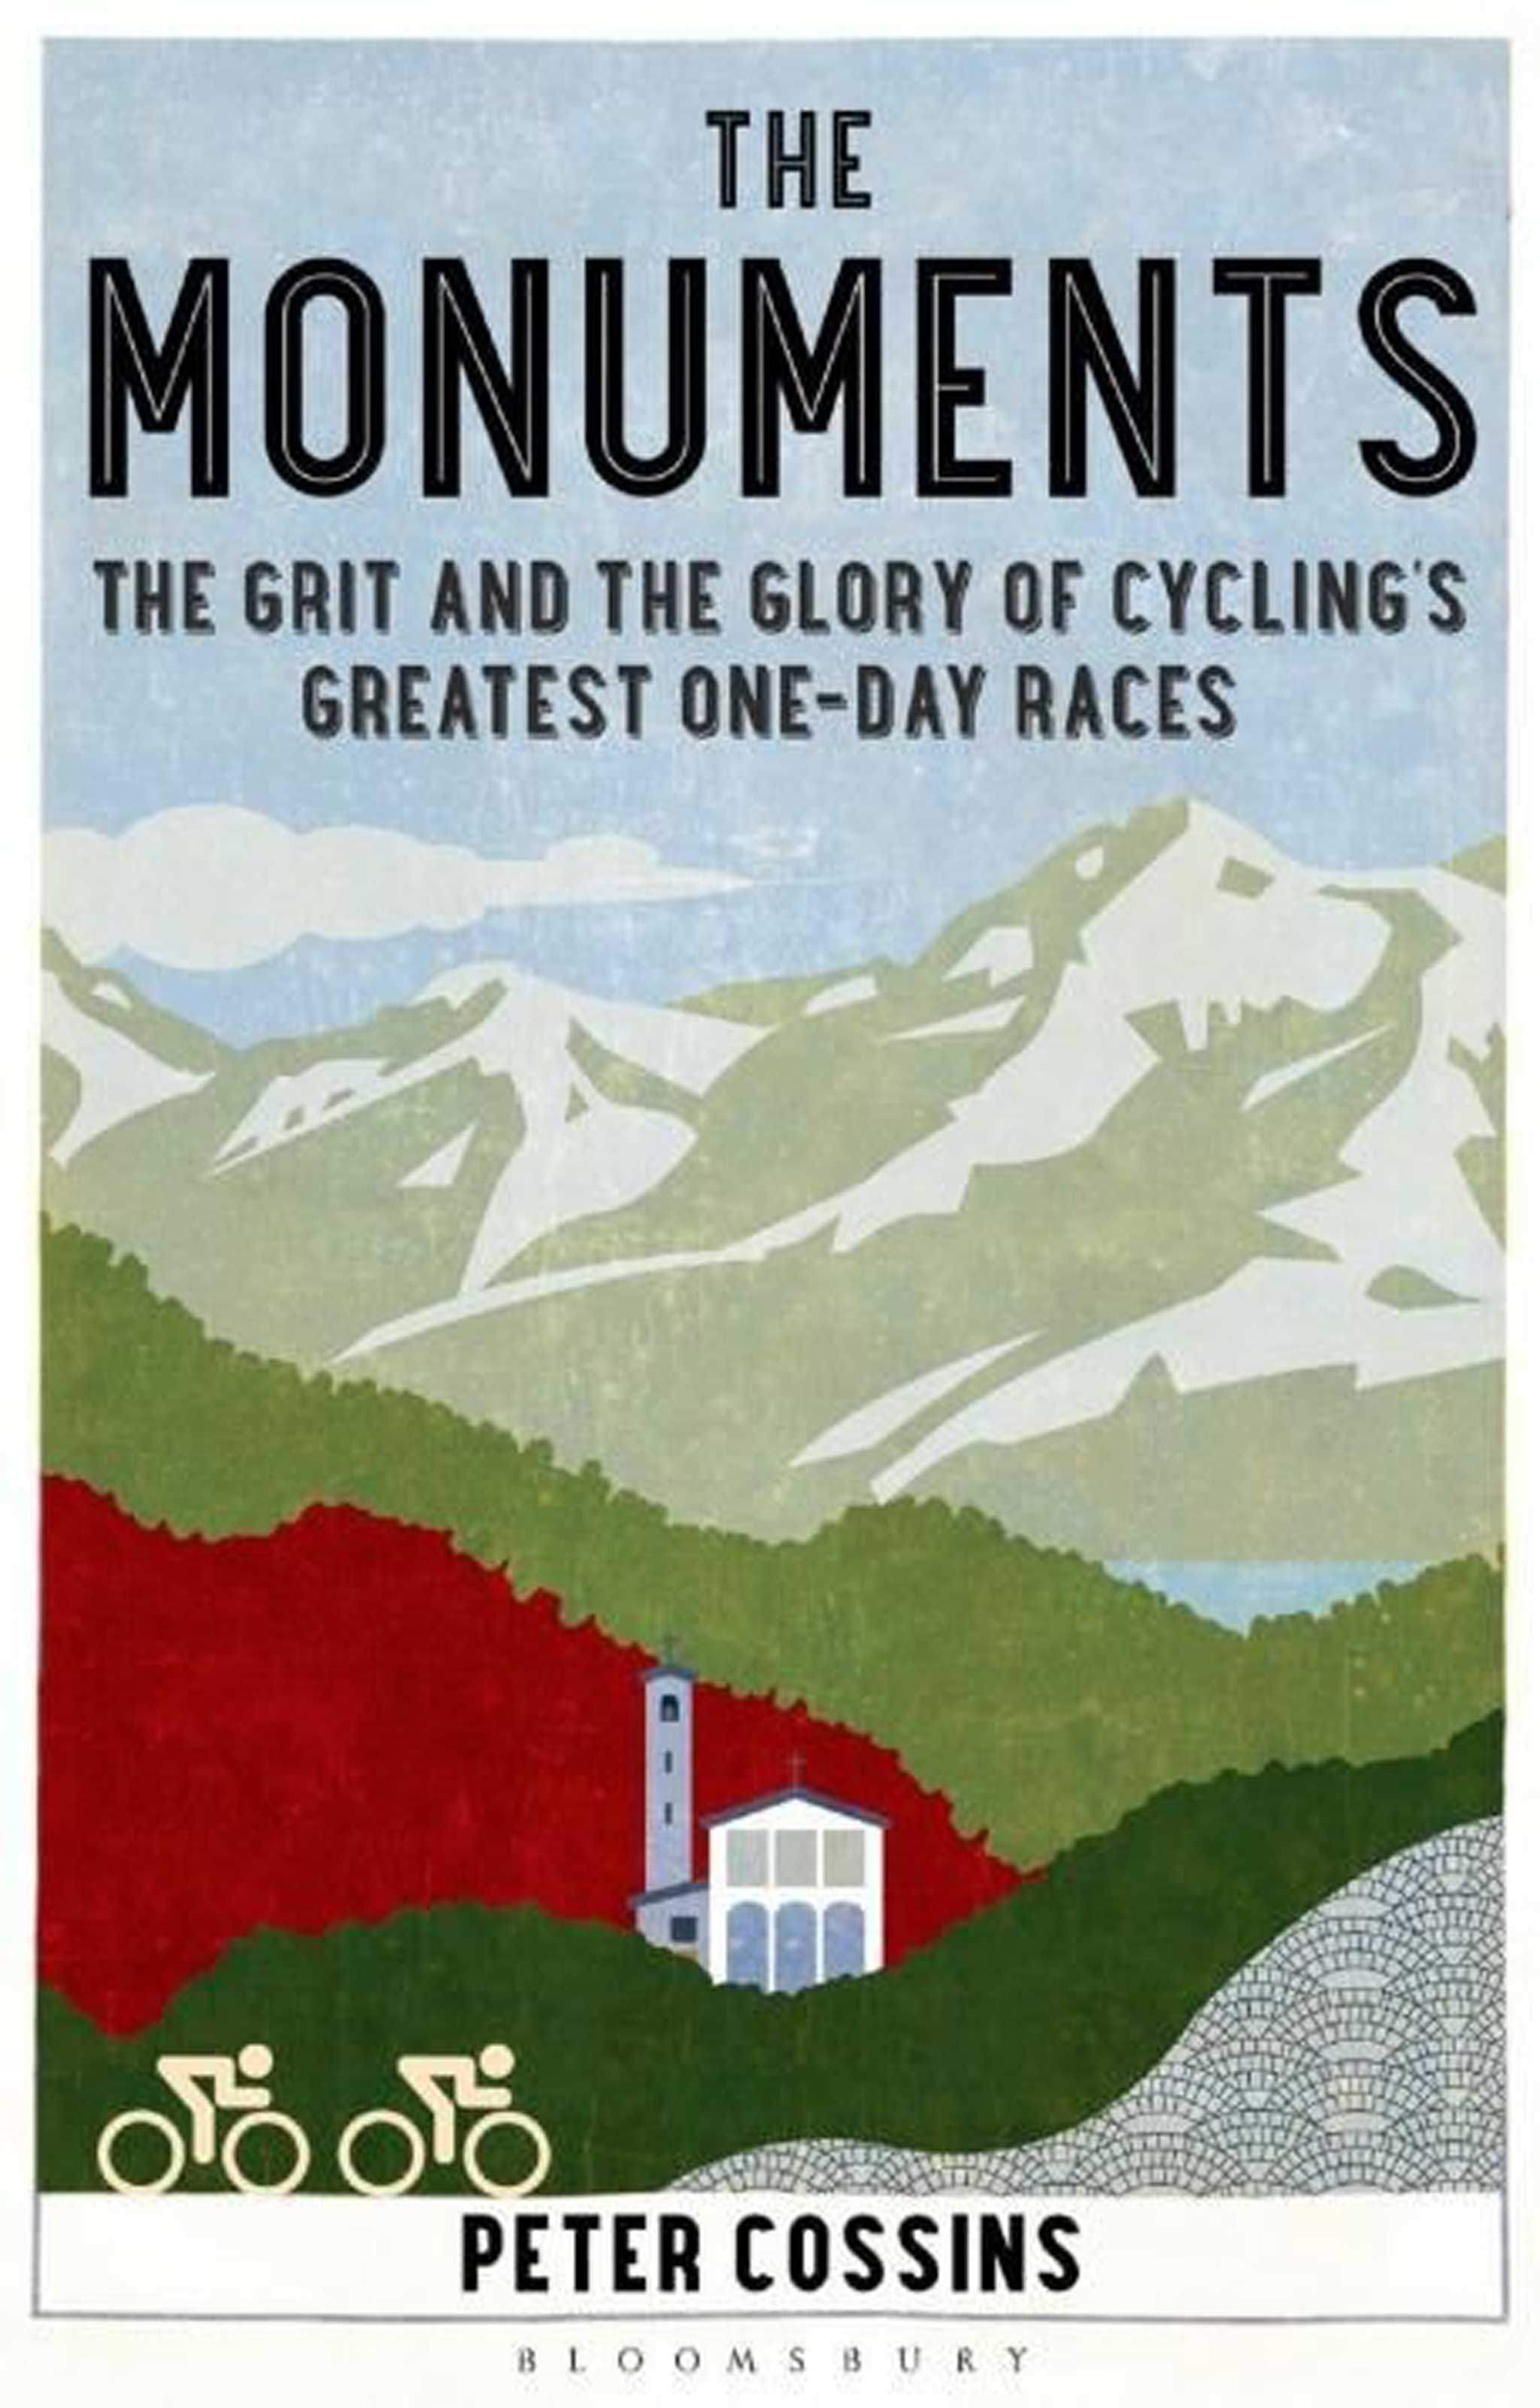 Book Review The Monuments Cyclings Greatest One Day Races intended for Elegant as well as Interesting cycling monuments regarding Inspire